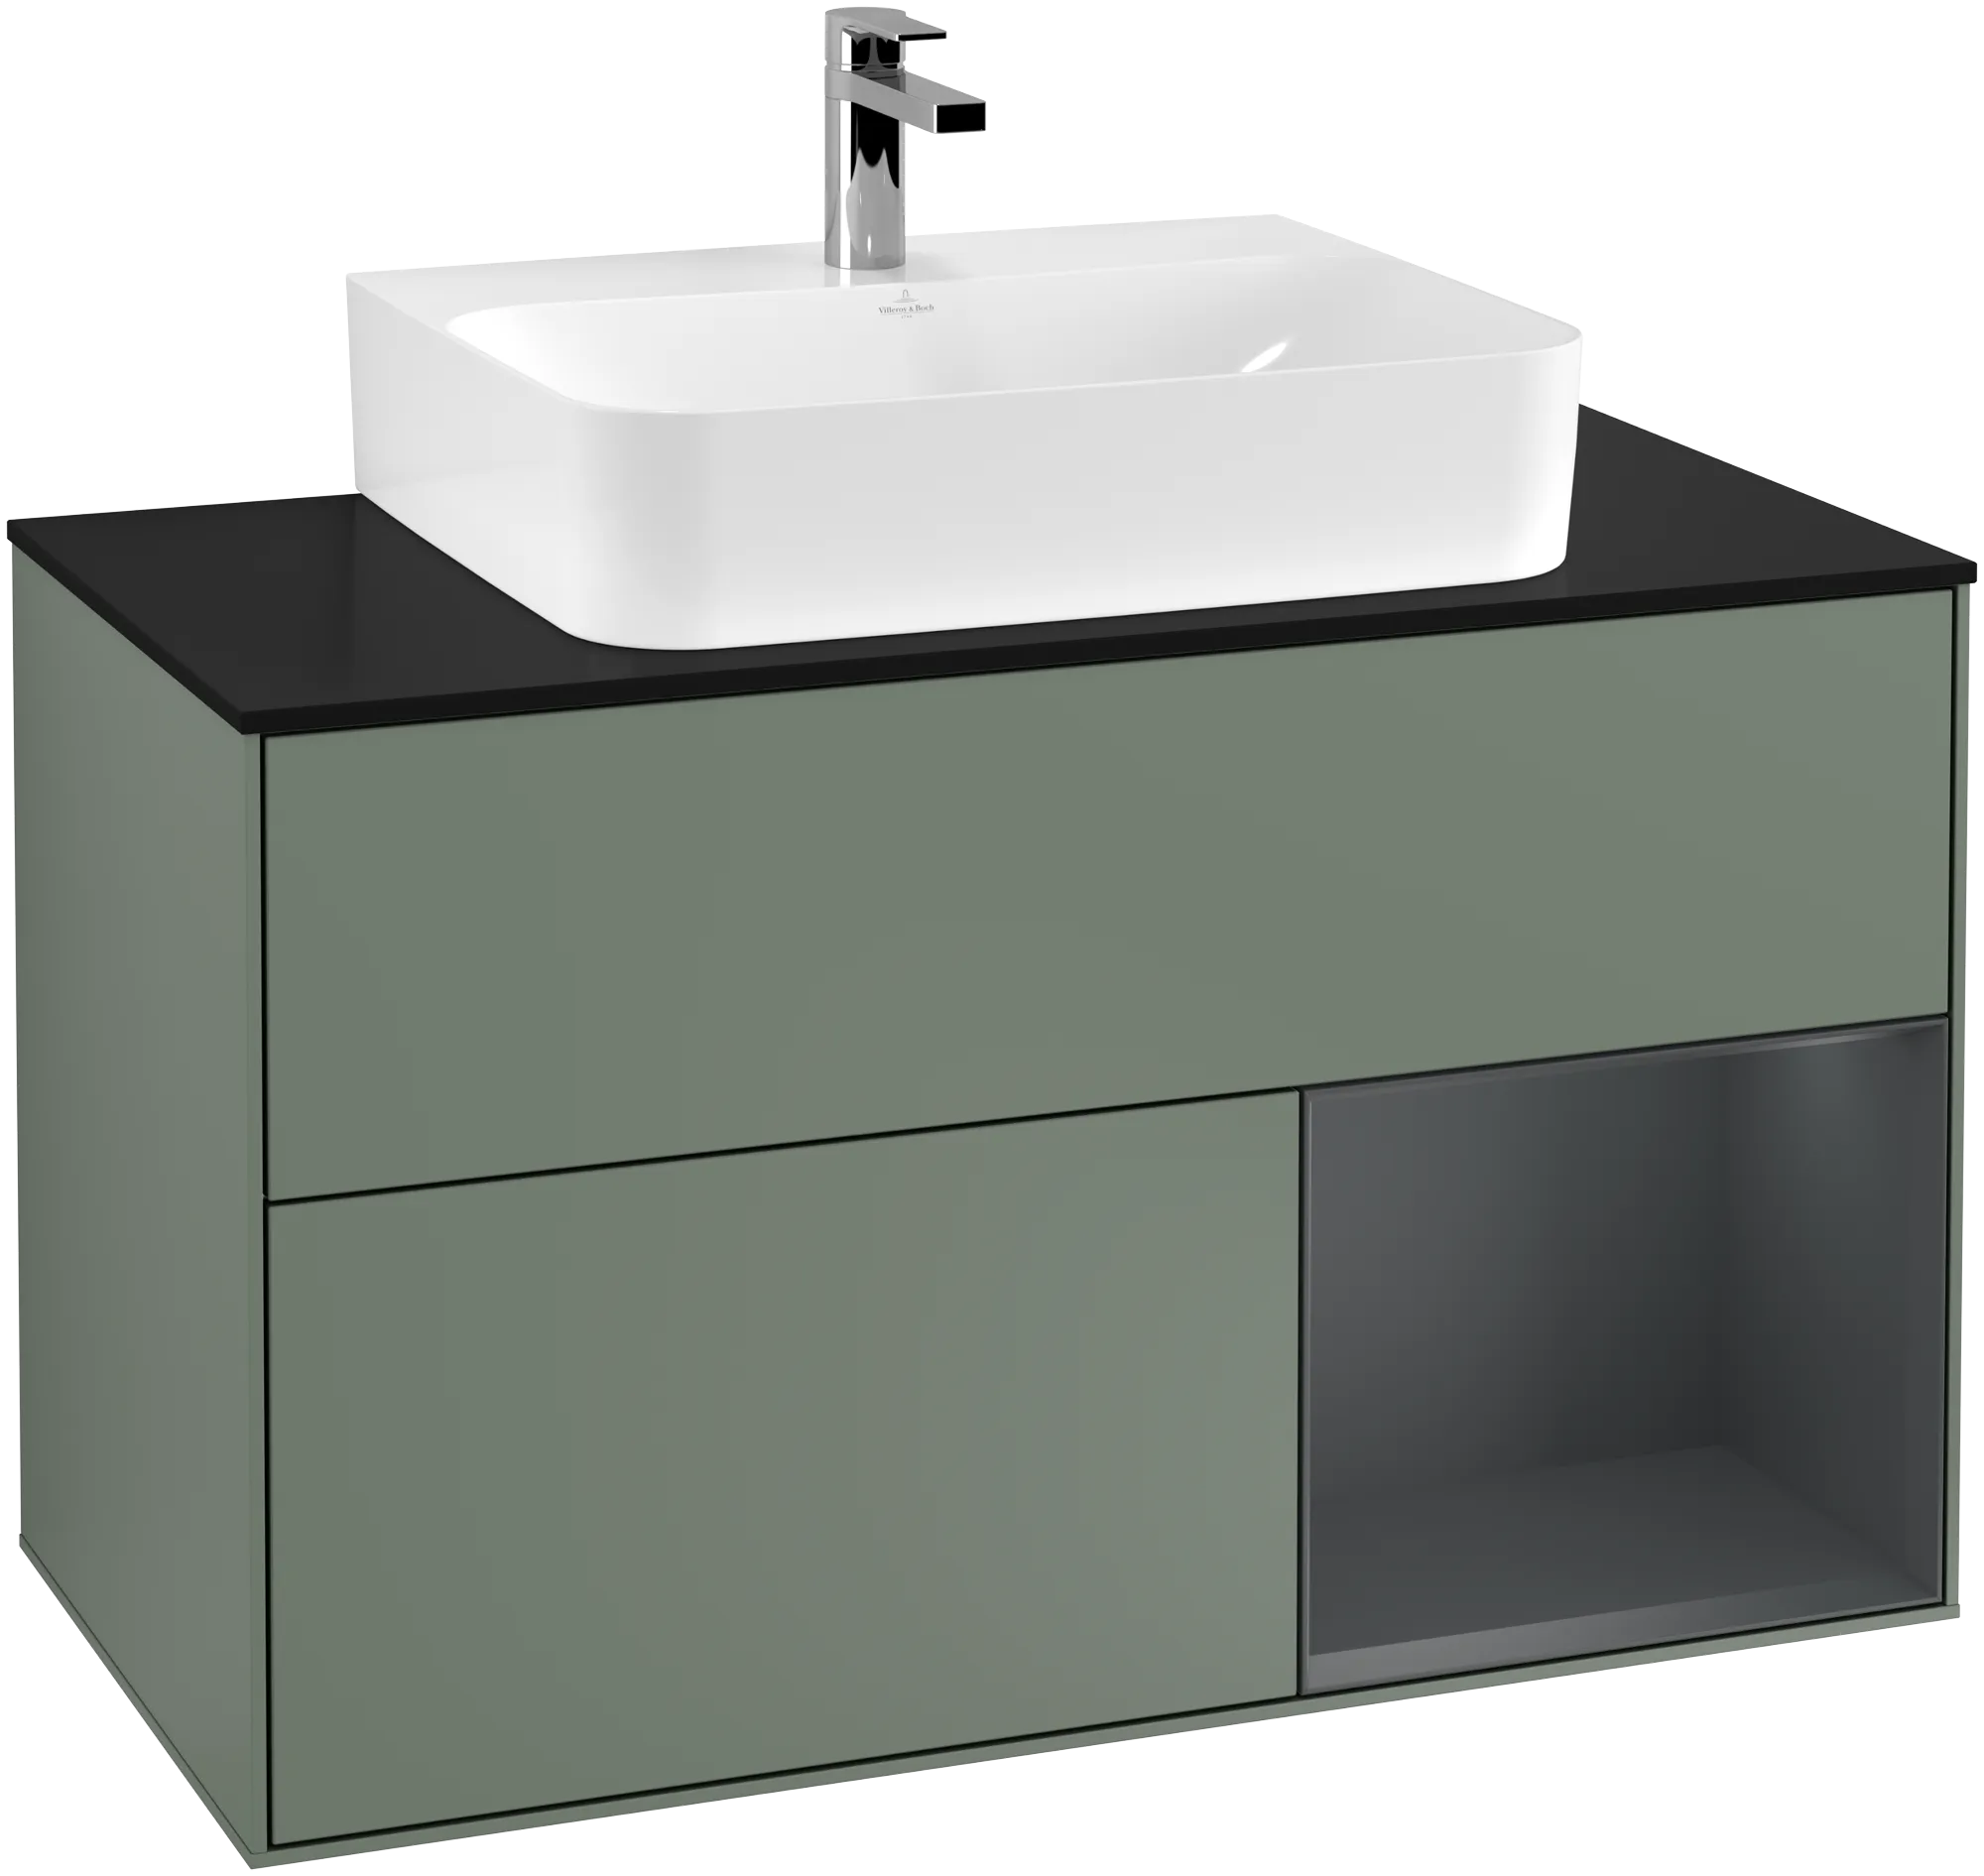 Picture of VILLEROY BOCH Finion Vanity unit, with lighting, 2 pull-out compartments, 1000 x 603 x 501 mm, Olive Matt Lacquer / Midnight Blue Matt Lacquer / Glass Black Matt #G122HGGM